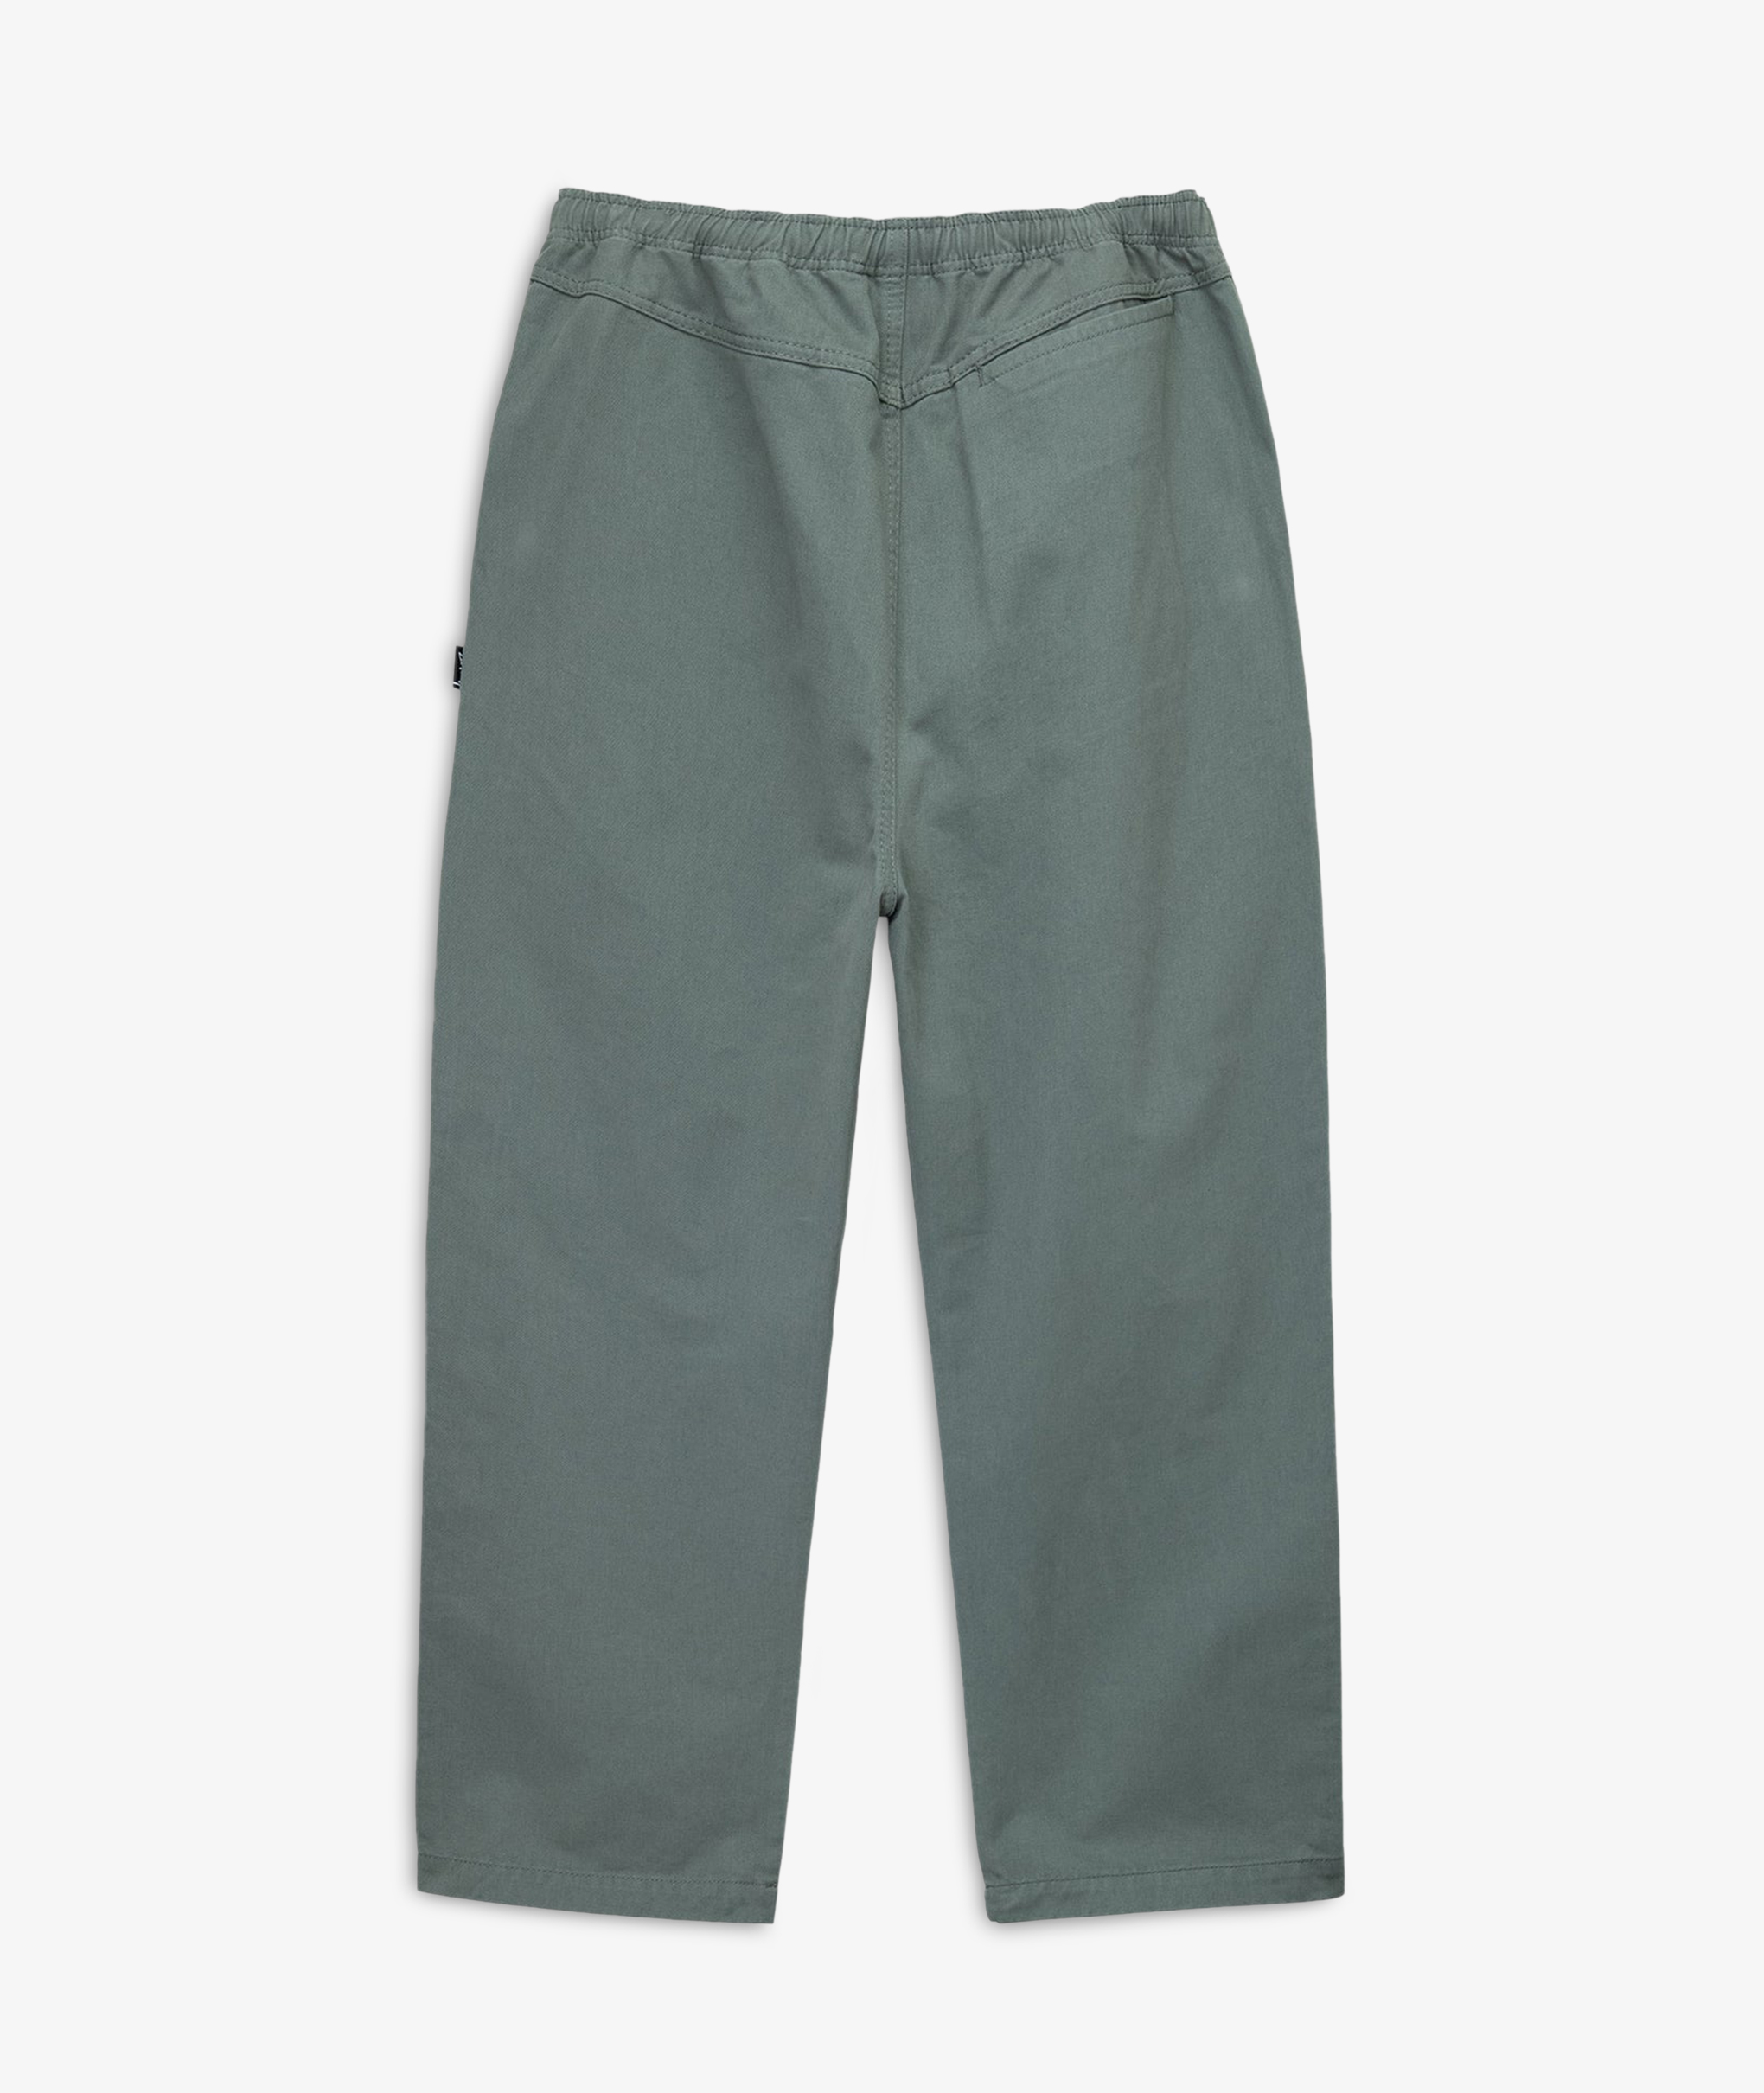 Norse Store | Shipping Worldwide - Stüssy Brushed Beach Pant - Sage